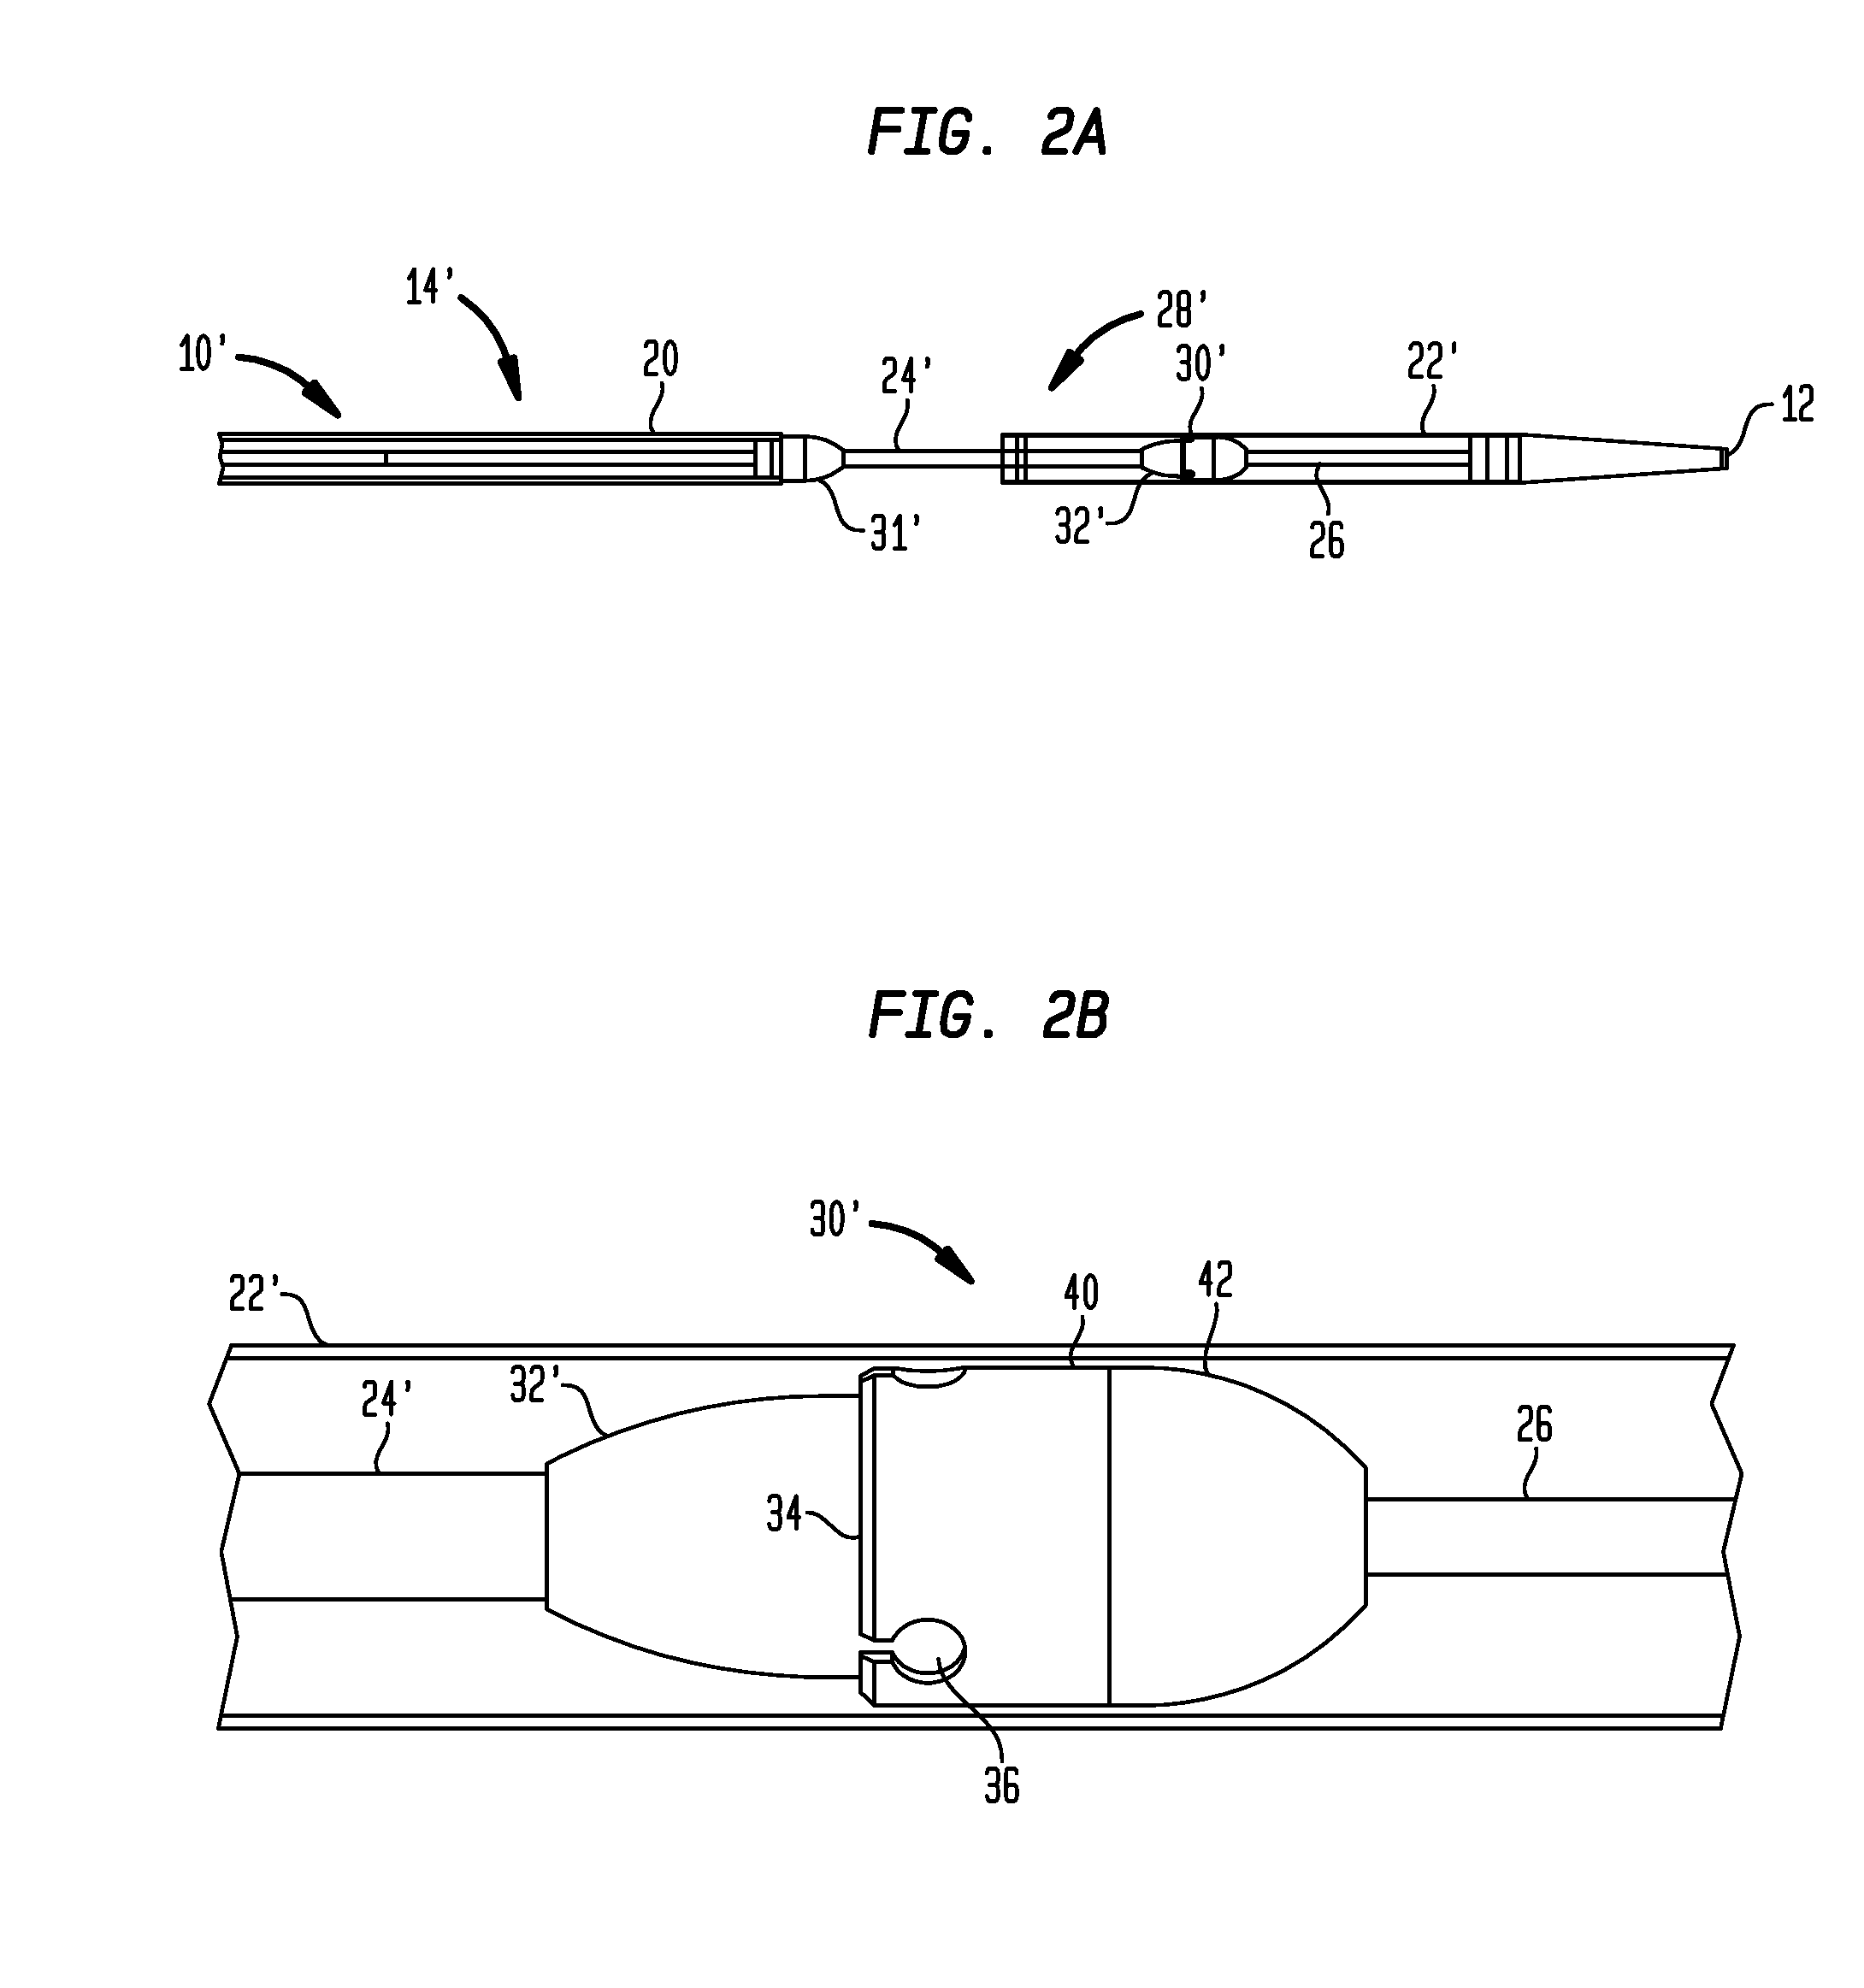 Retainers for transcatheter heart valve delivery systems